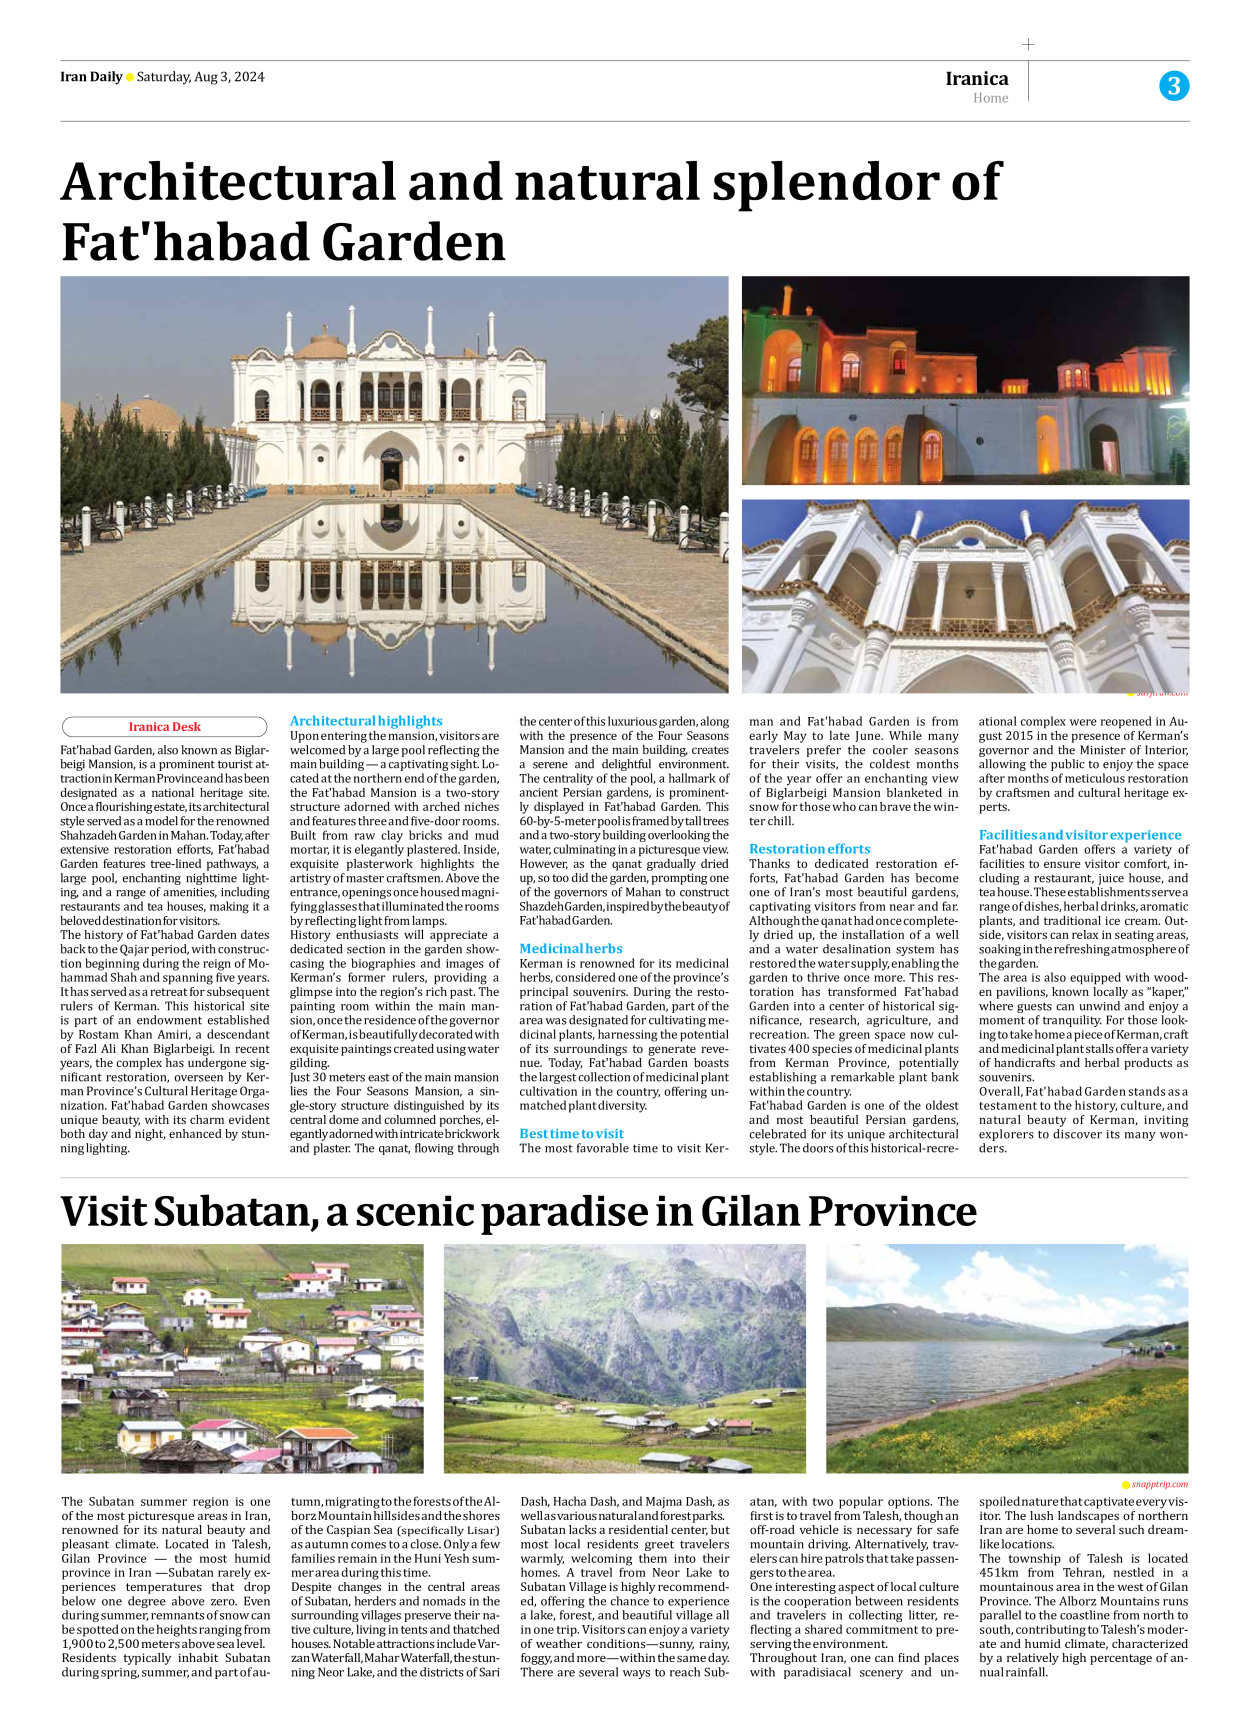 Iran Daily - Number Seven Thousand Six Hundred and Eighteen - 03 August 2024 - Page 3